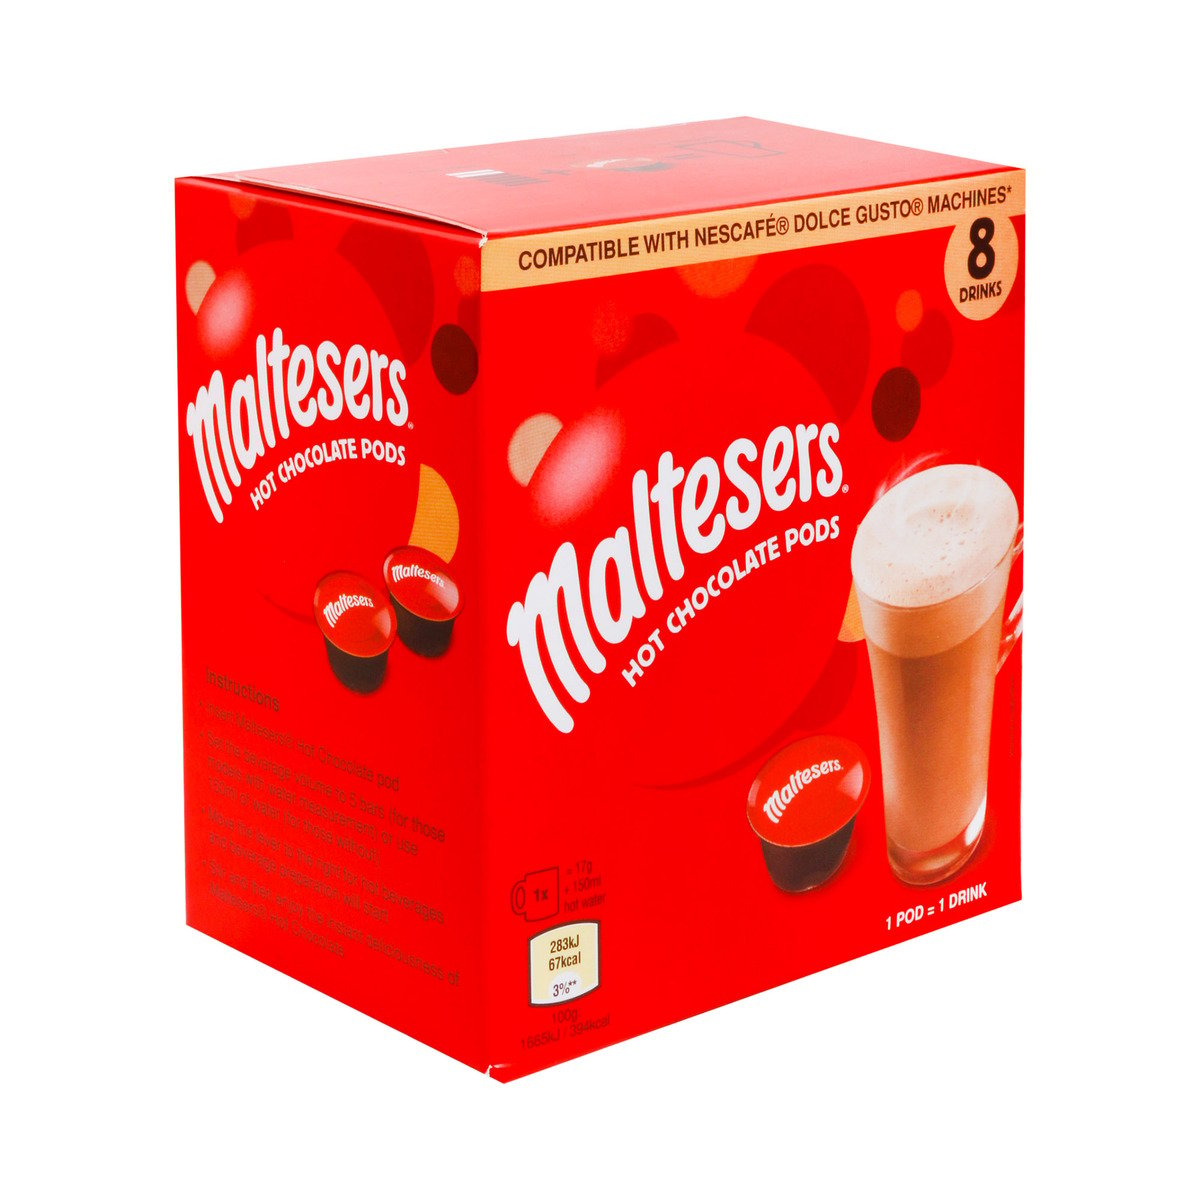 Maltesers Dolce Gusto Hot Chocolate Pods 8 x 17 g